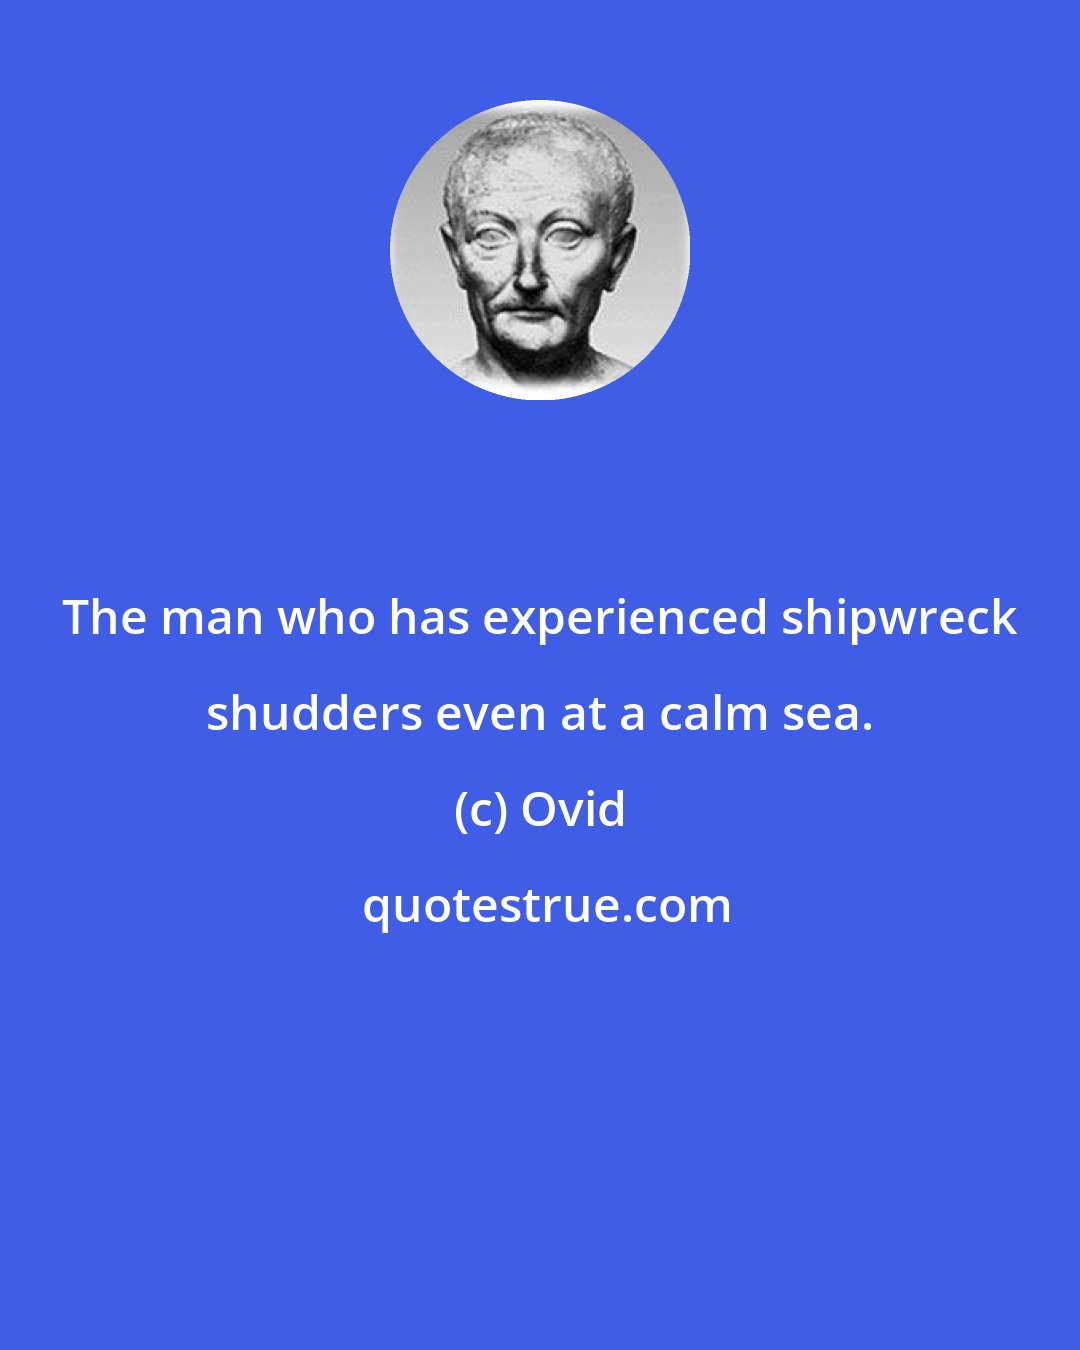 Ovid: The man who has experienced shipwreck shudders even at a calm sea.